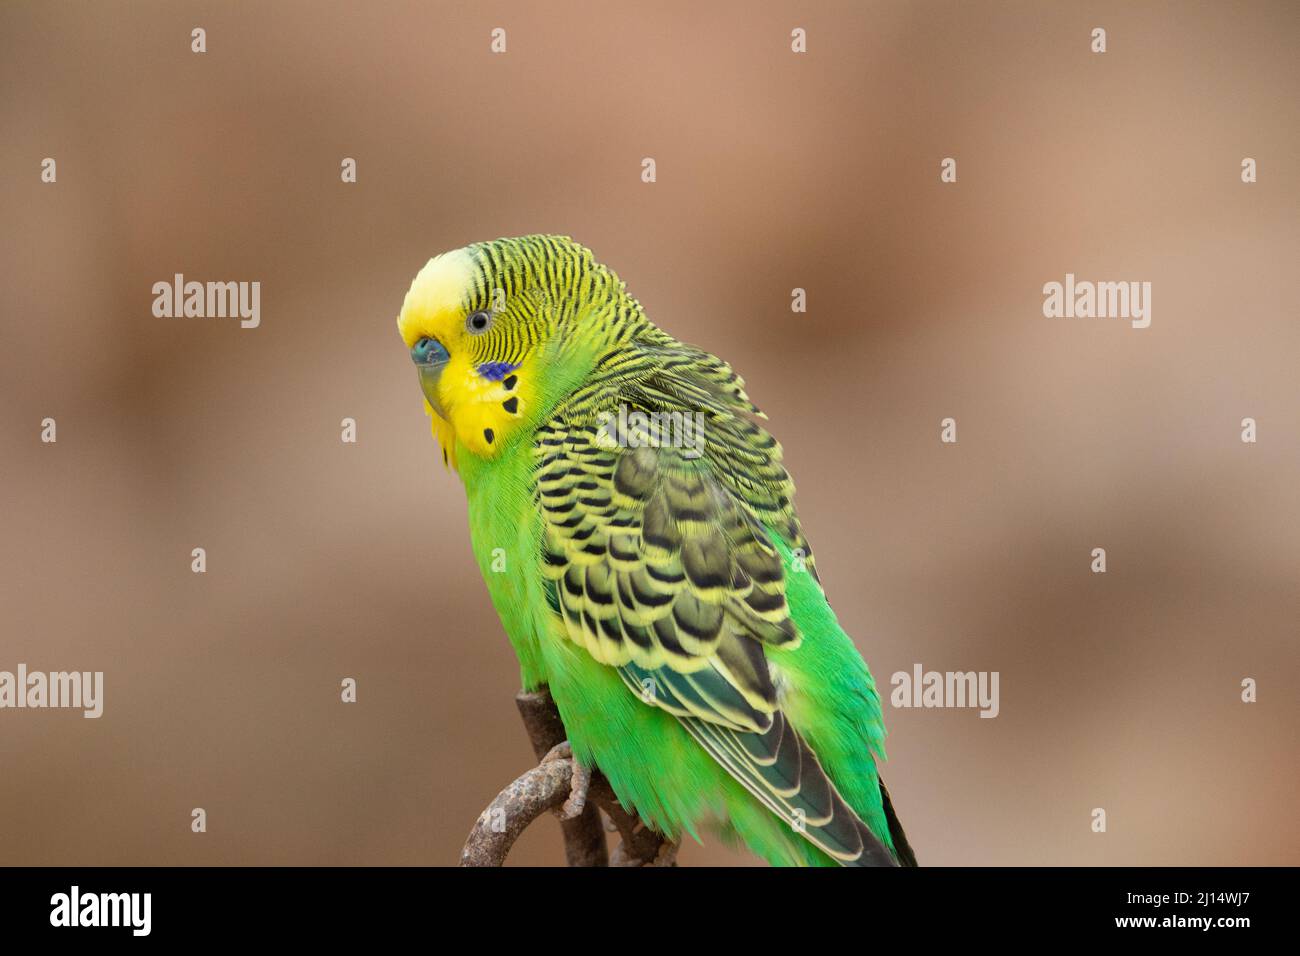 a single green and yellow Budgerigar (Melopsittacus undulatus) perched on a branch with a sand brown coloured background Stock Photo